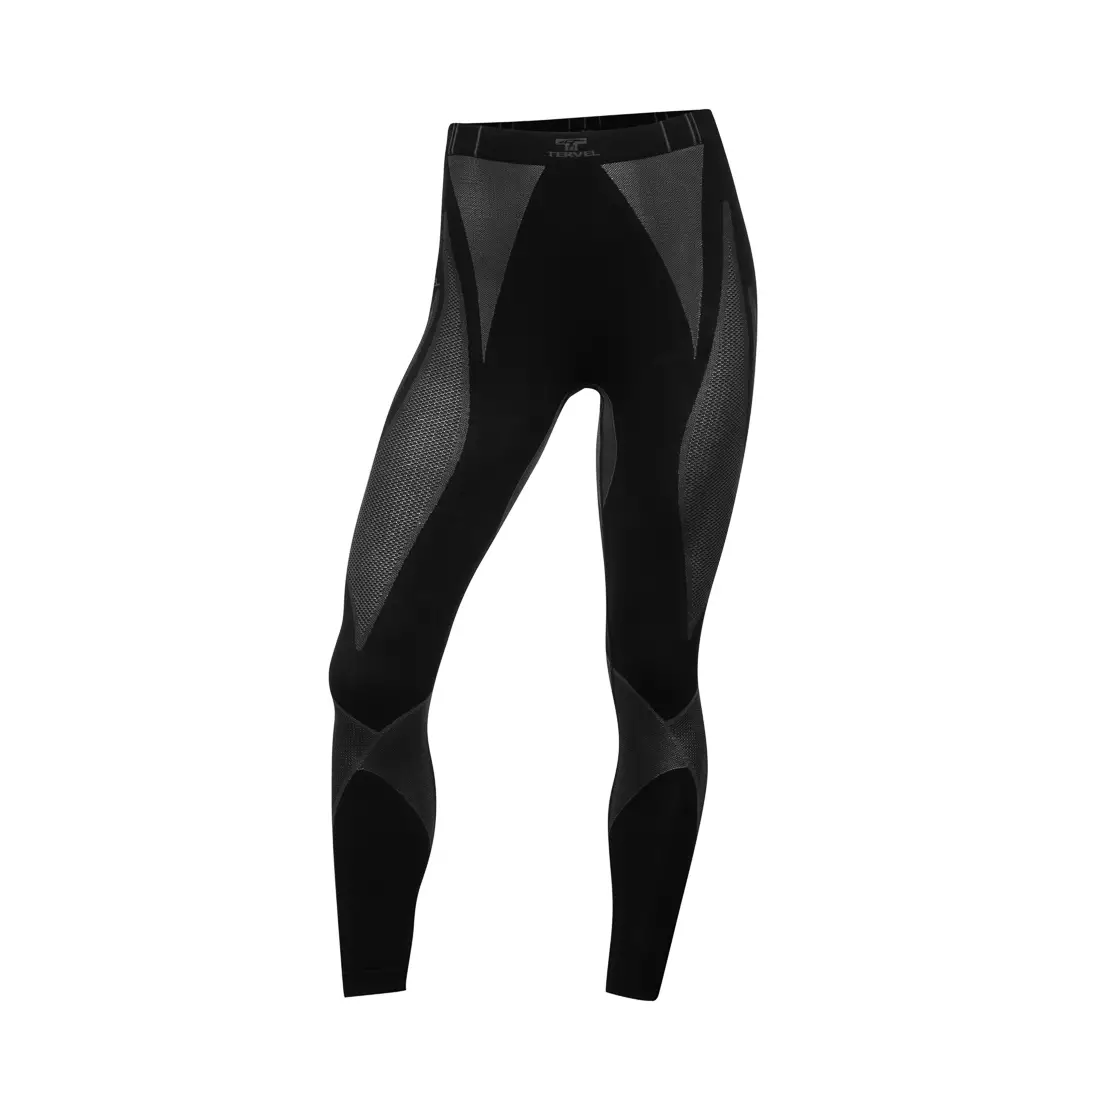 TERVEL OPTILINE MOD-02 - women's thermoactive leggings color: Black and gray